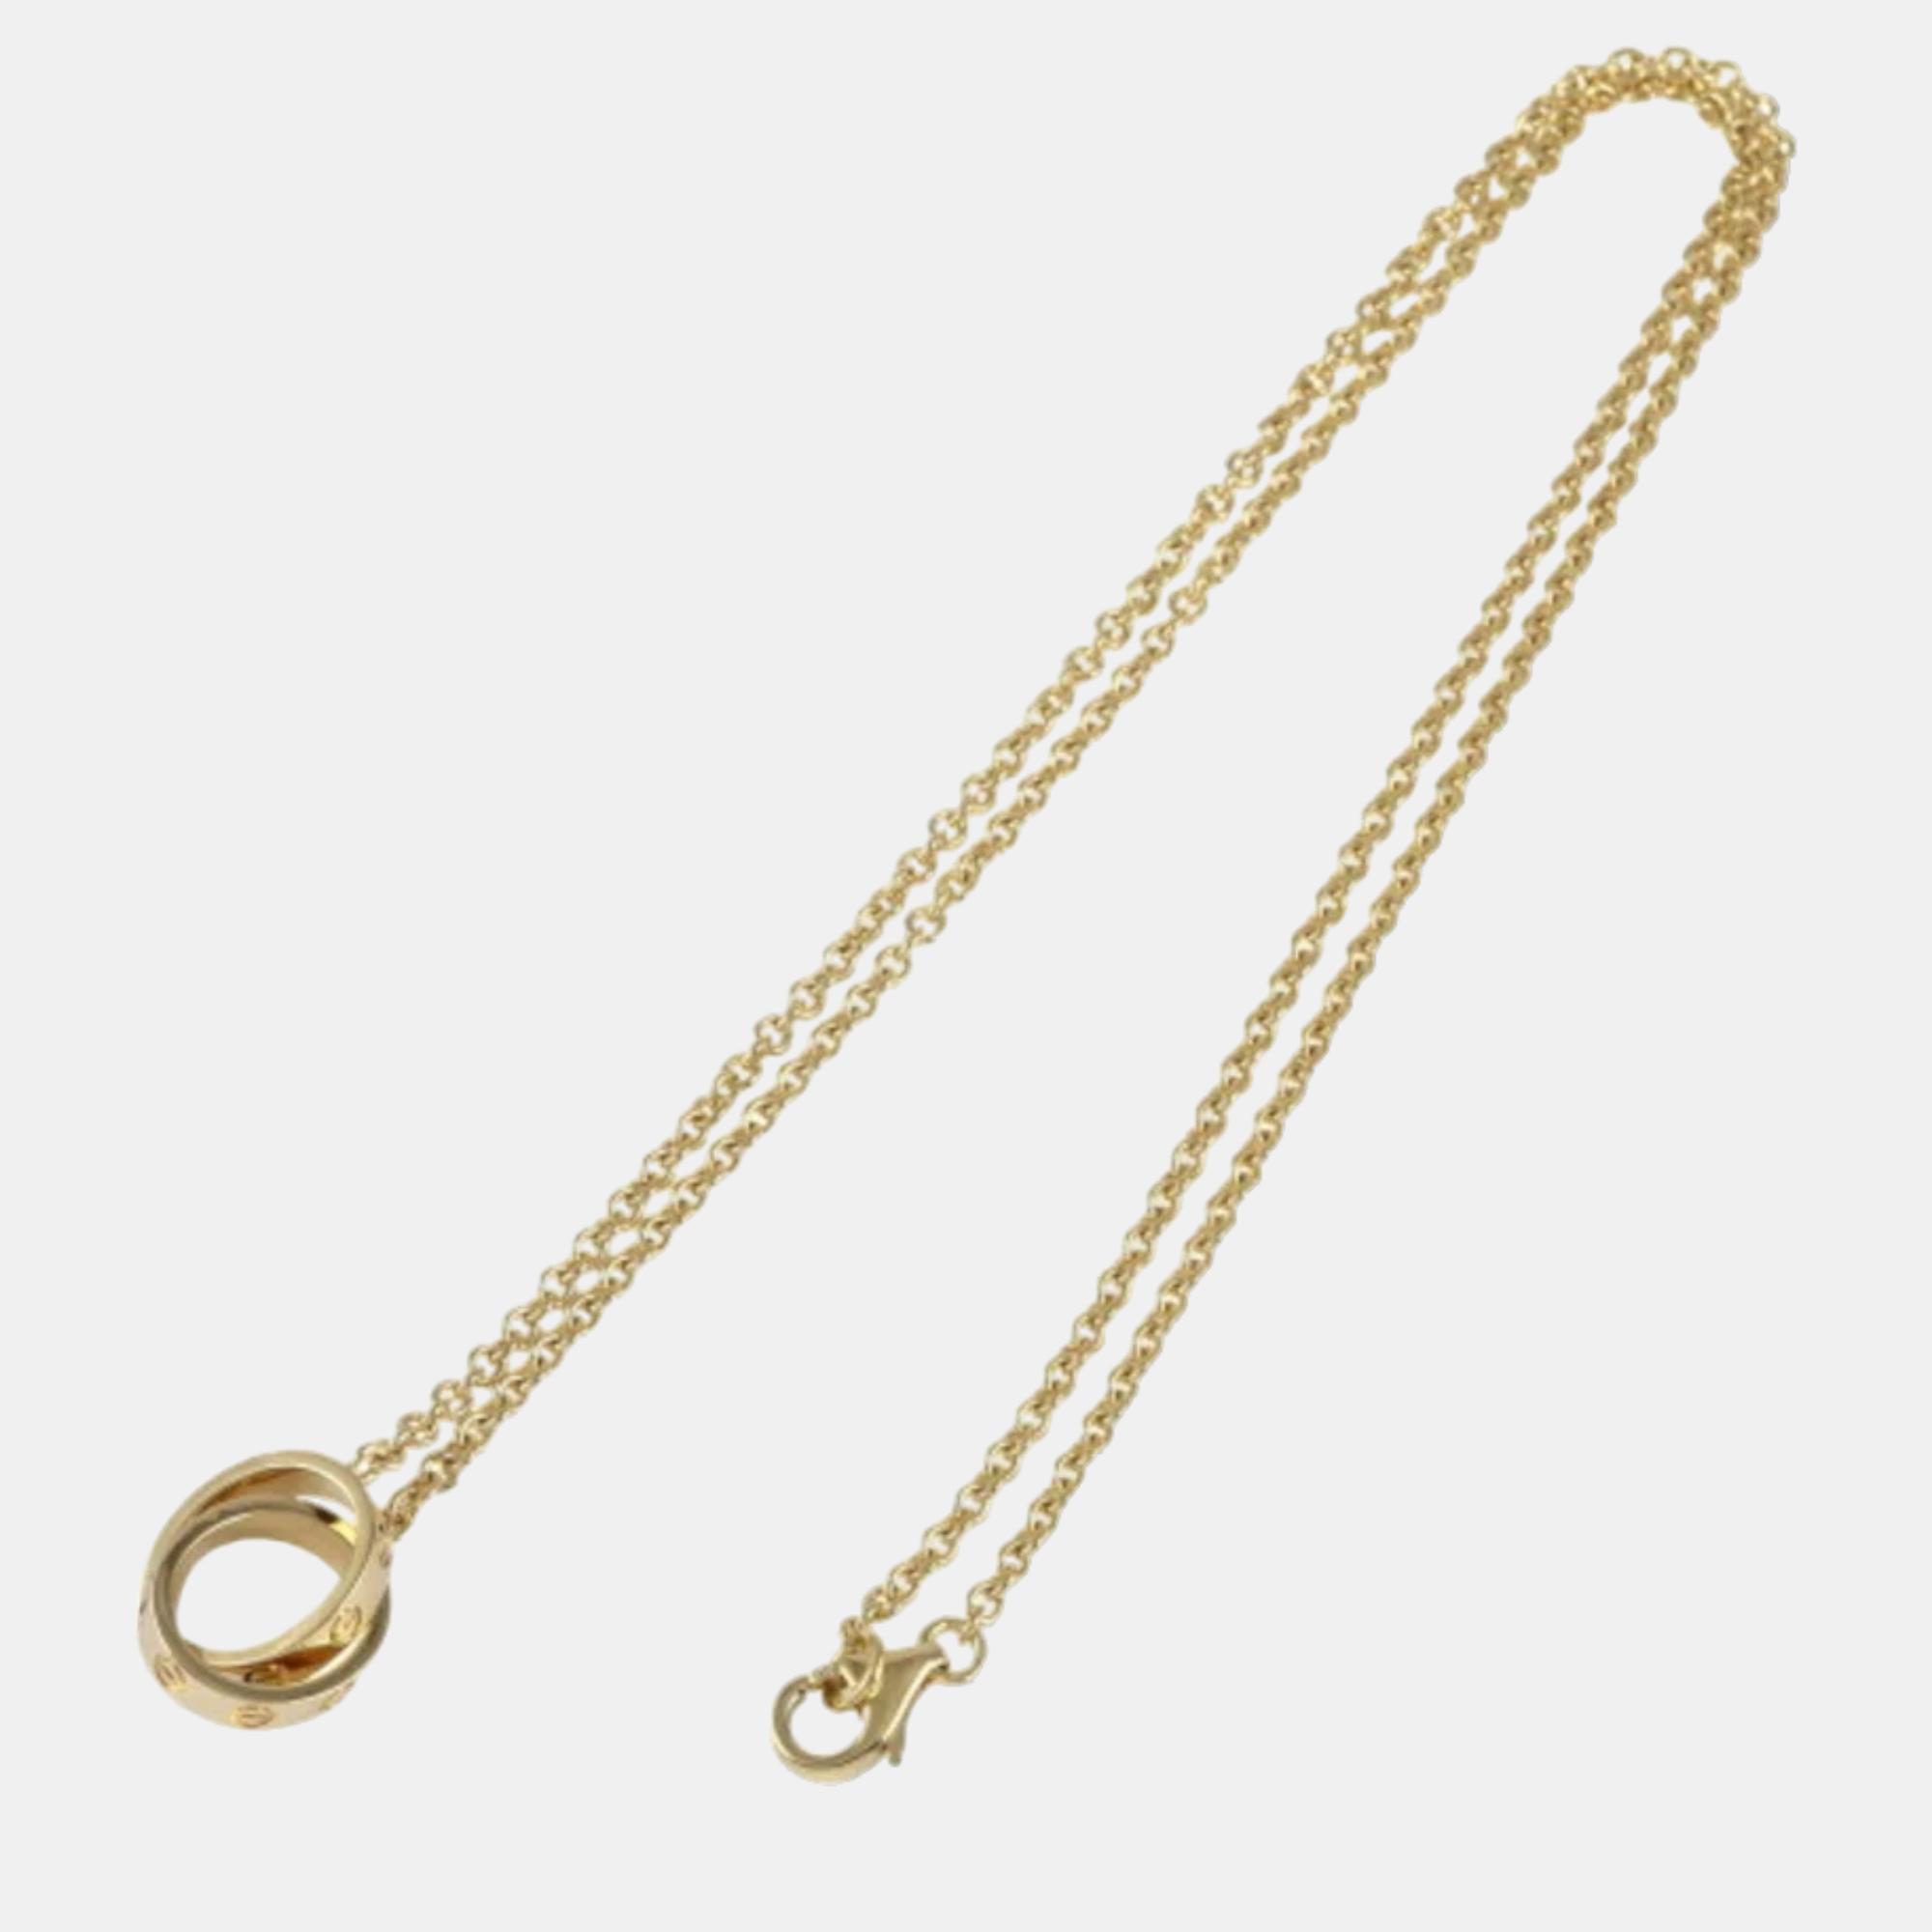 Cartier love 18k yellow gold necklace